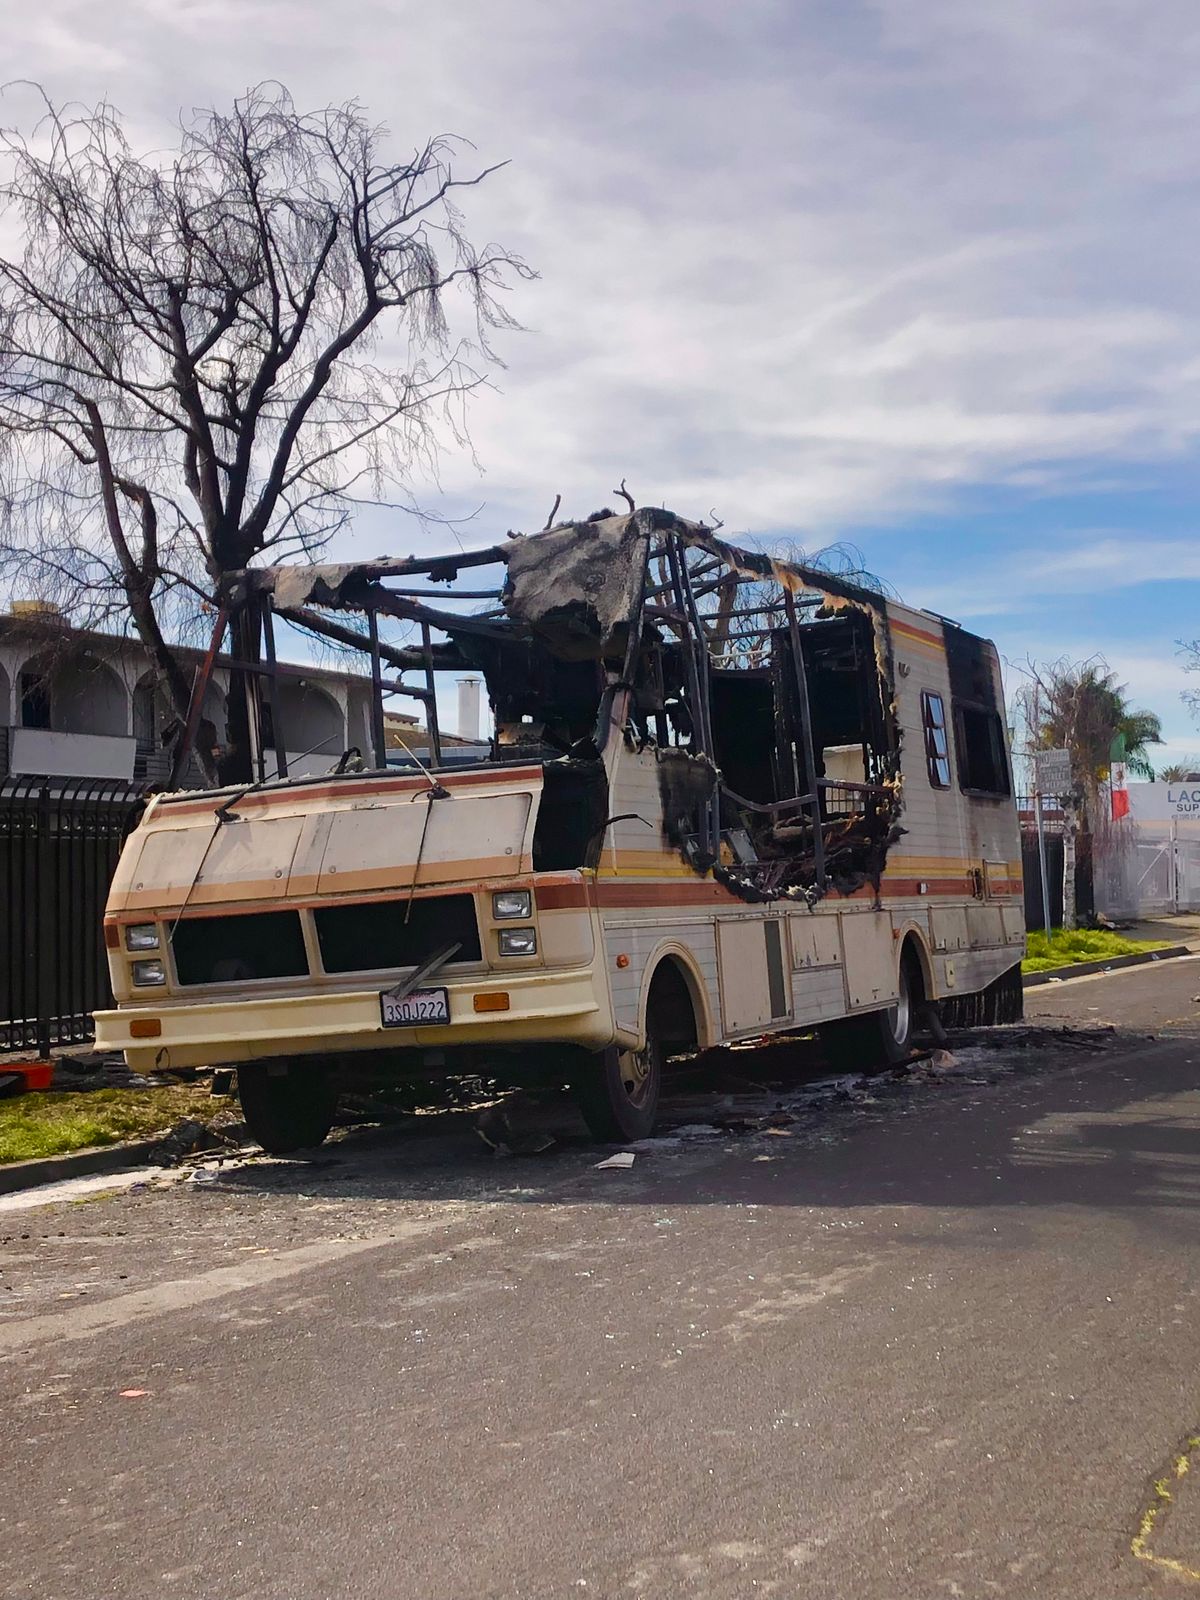 RV latest vehicle scorched in Richmond